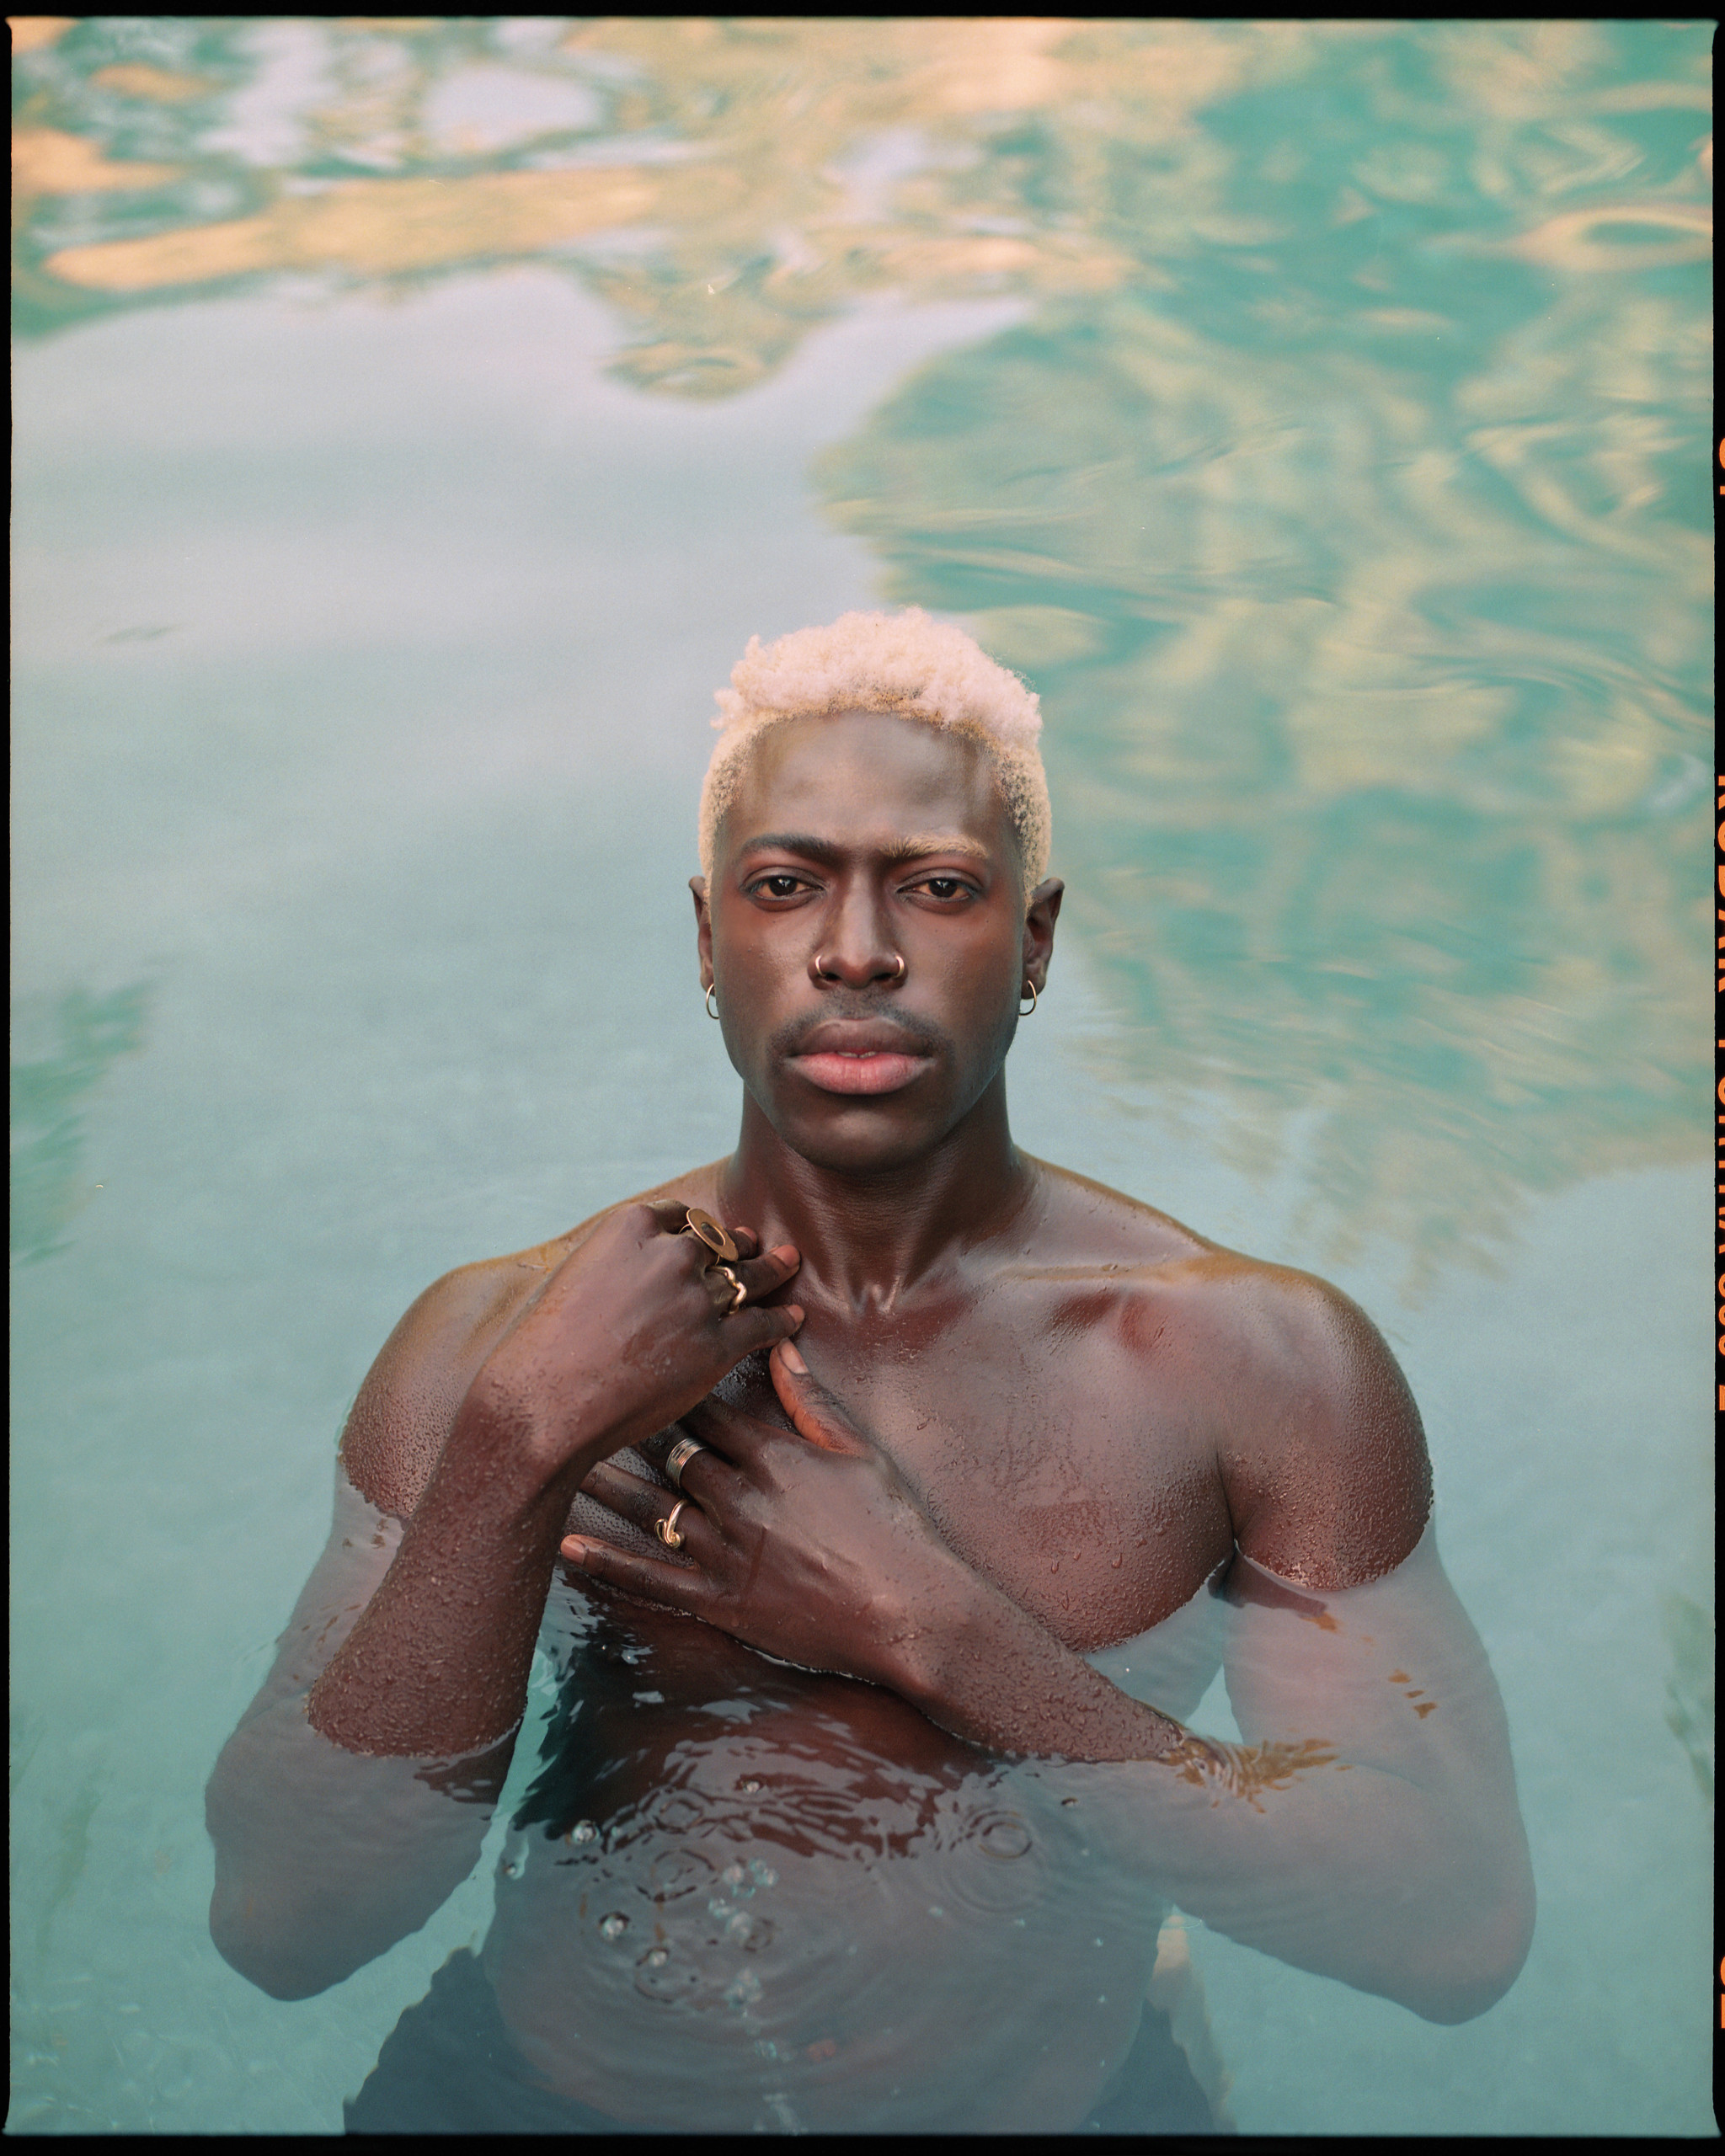 Moses Sumney. Styling by Karolyn Pho. Pants by LV x NBA Collection. Grooming by Annette Chaisson for Exclusive Artists using Koh Gen Do. Photo assistant Amanda Yanez. Styling assistant Kailee Takashima.